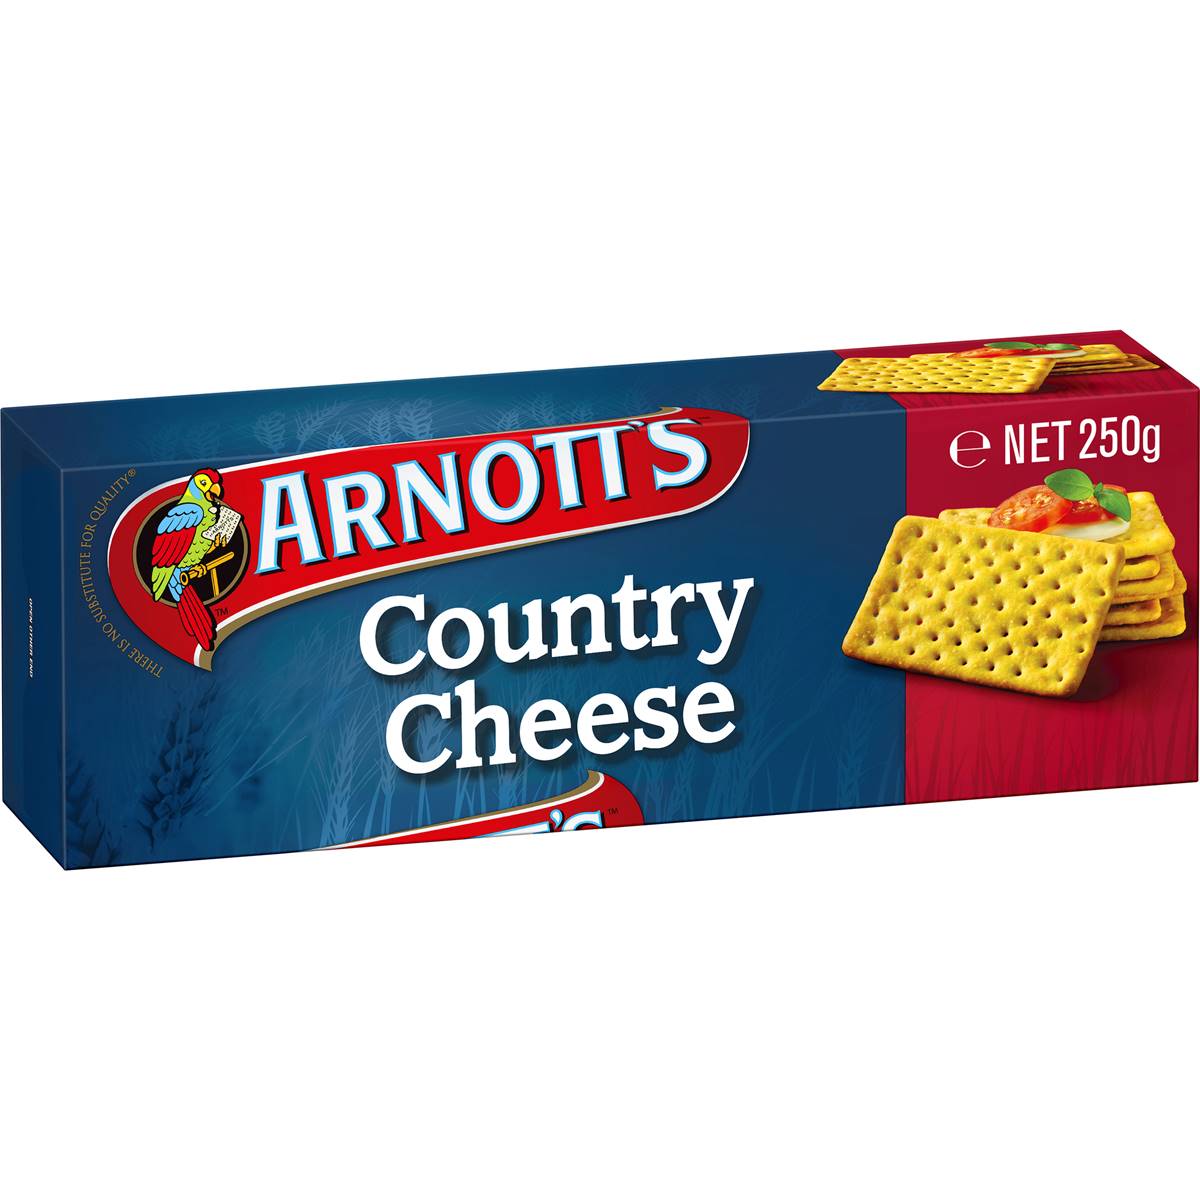 Calories In Arnotts Crackers Biscuits Country Cheese Calcount 0969